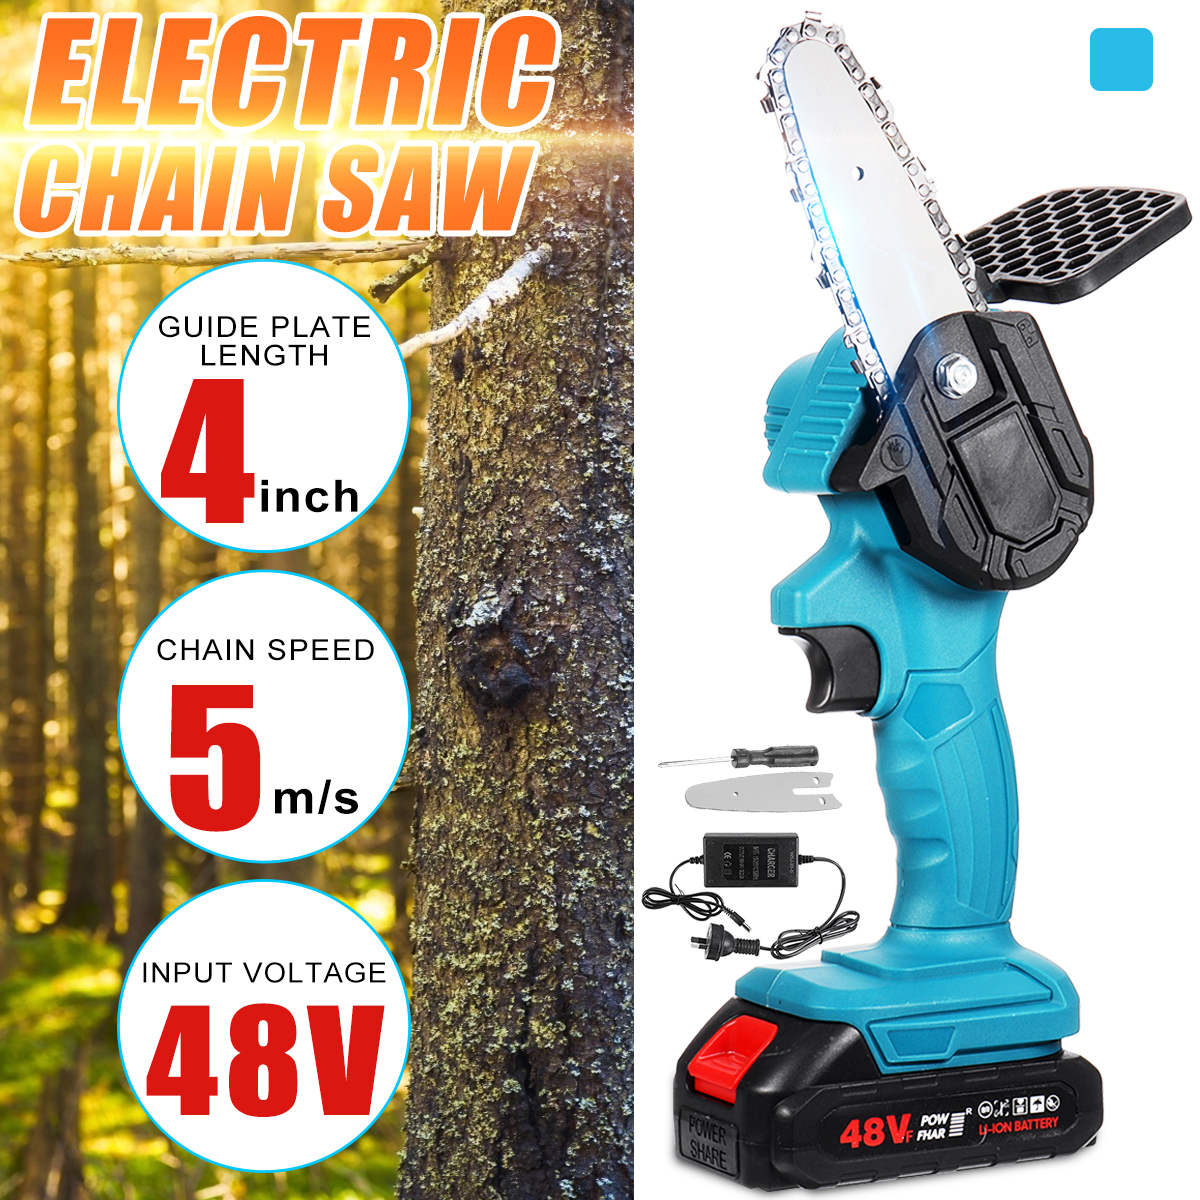 4inch-800W-48VF-Electric-Chain-Saw-Portable-Handheld-Wood-Cutter-Woodworking-Cutting-Tool-W-None1pc2-1827616-1